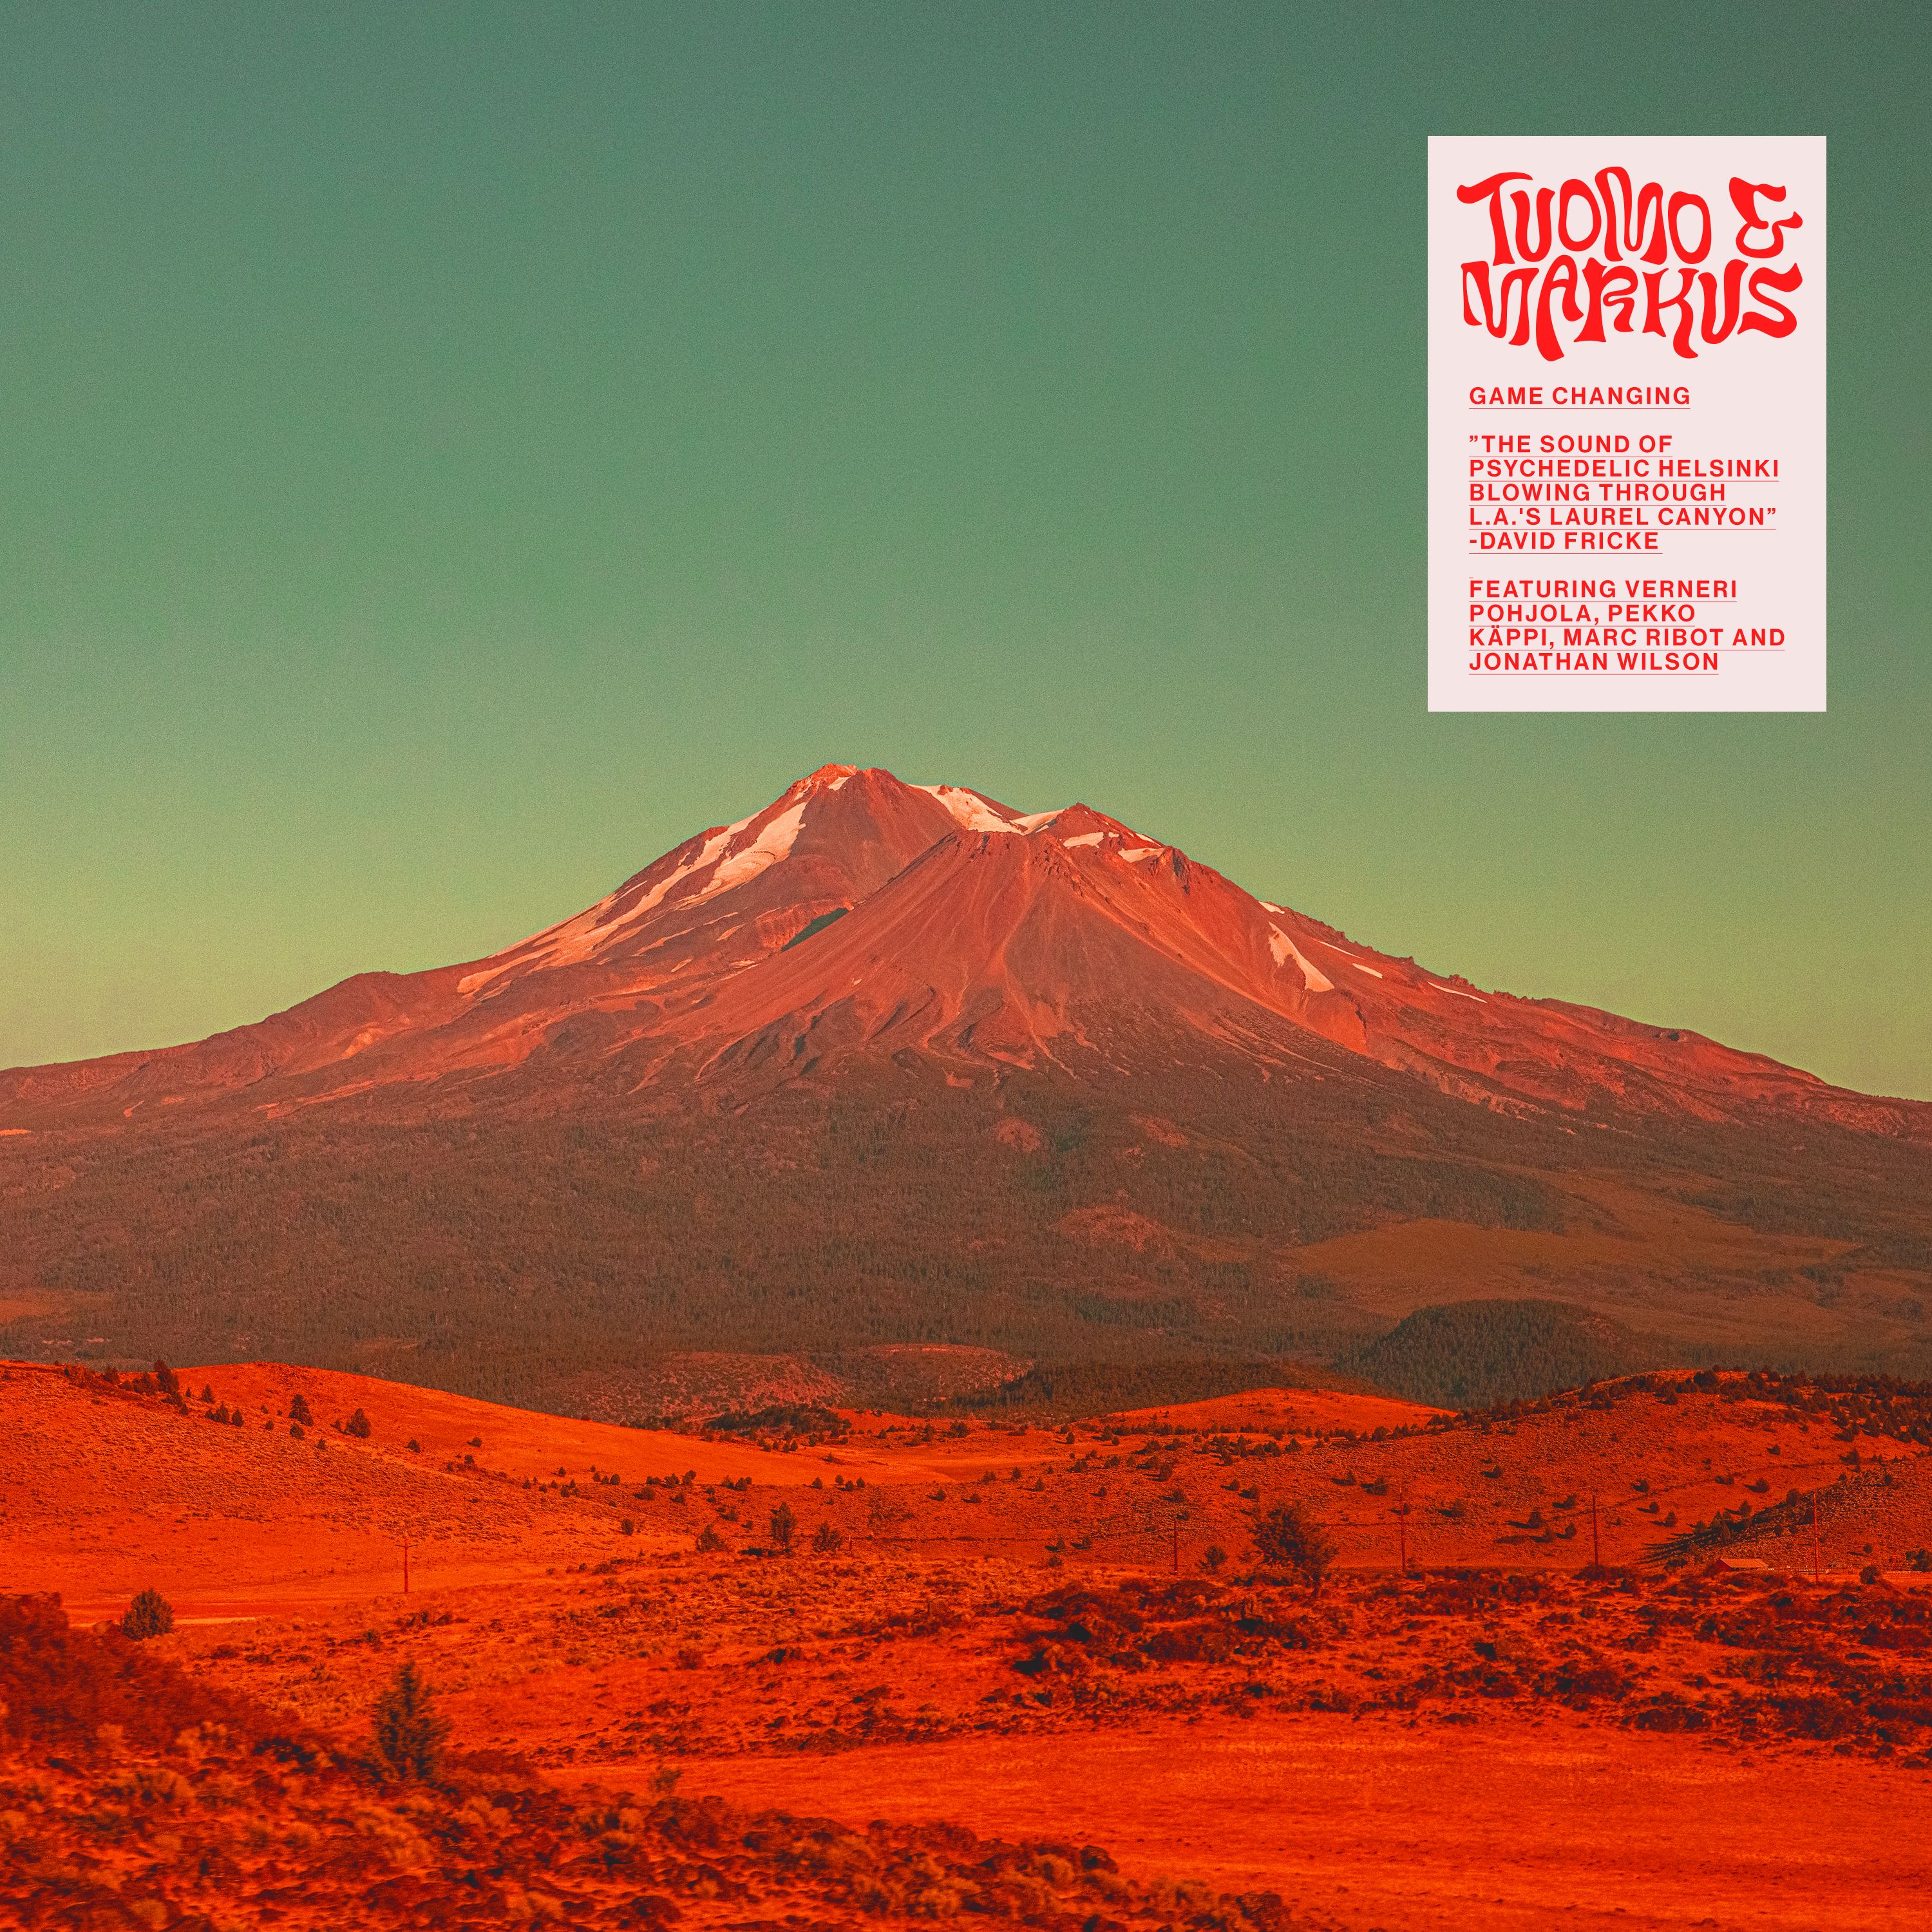 Psychedelic Helsinki meets Laurel Canyon - Tuomo & Markus new album out today